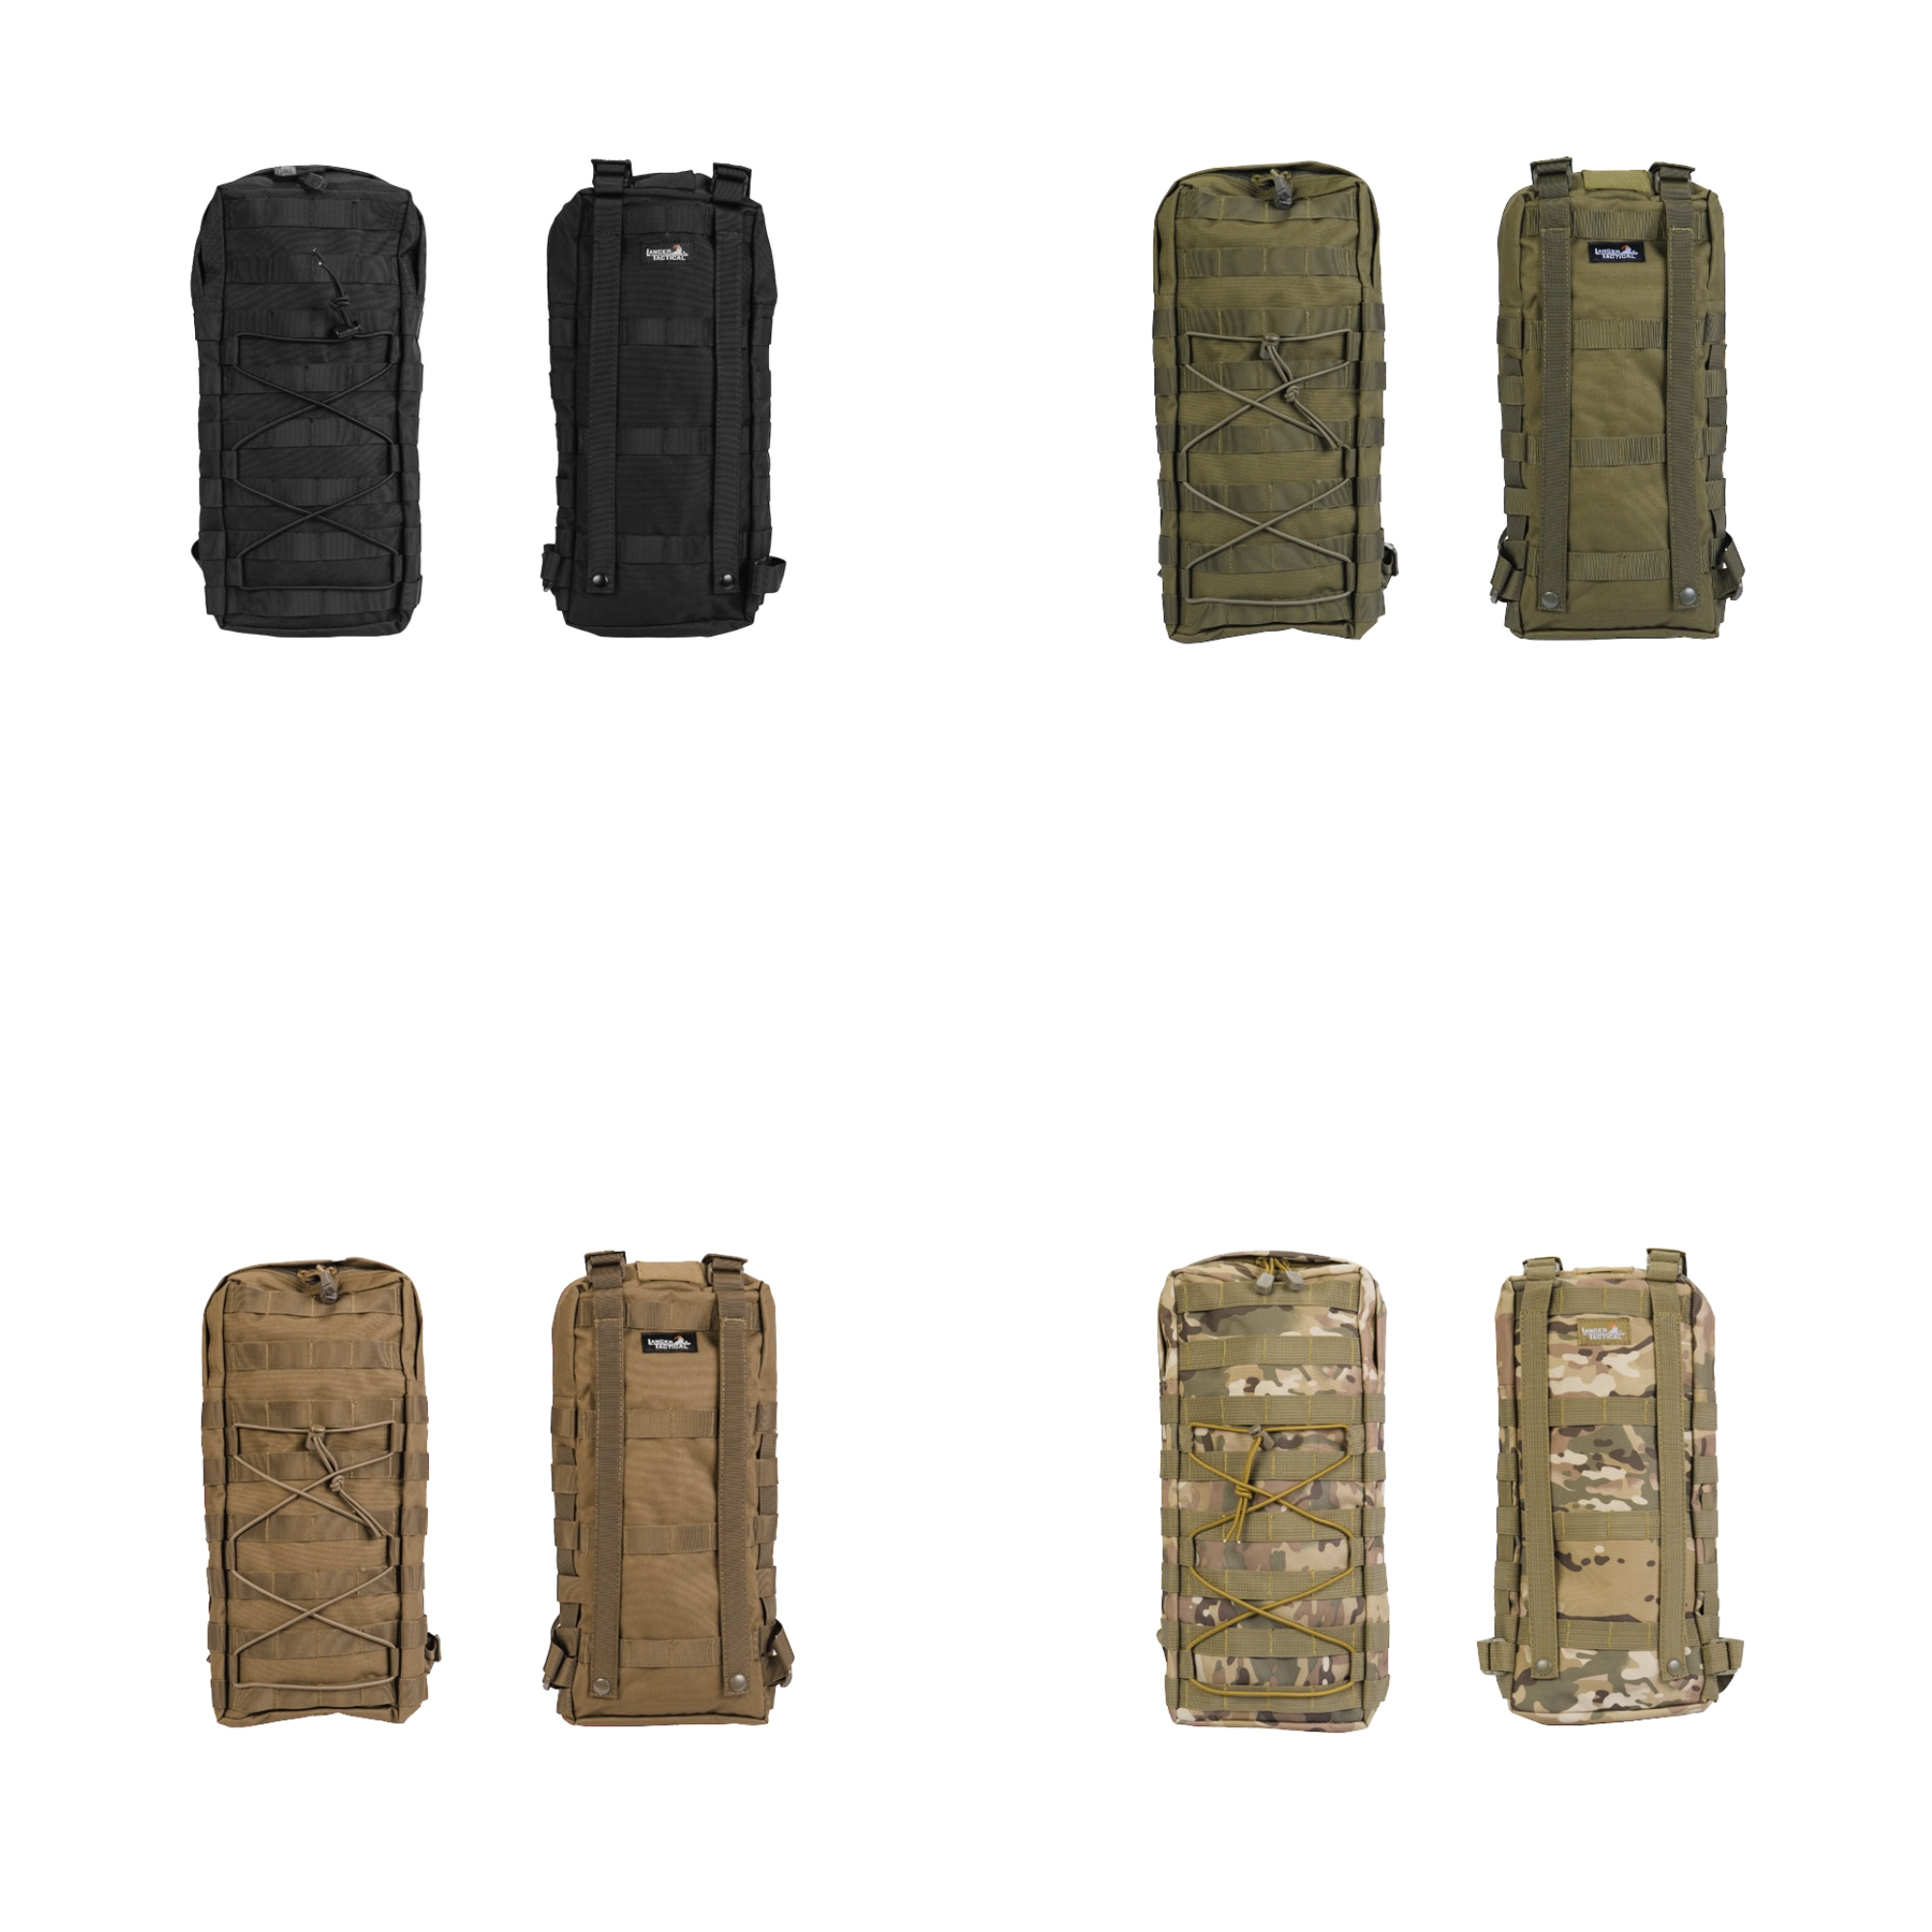 Lancer Tactical Nylon Molle Attachable Hydration Backpack - ssairsoft.com